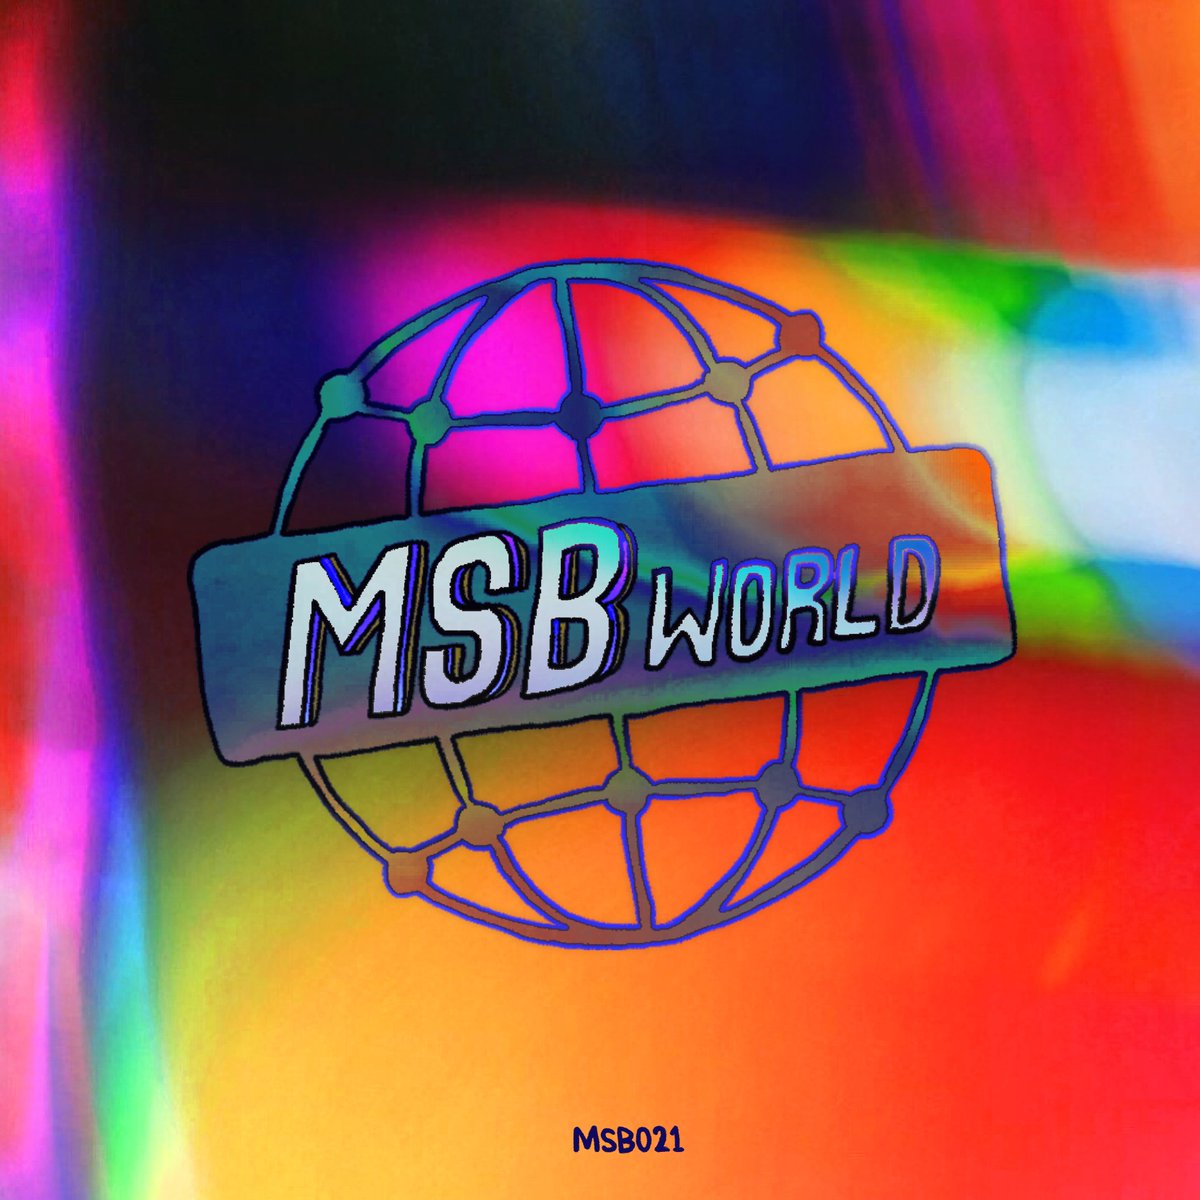 Tune in to @boxoutfm tonight from 8-9pm for #MSBWorld ep.21 with @madstarbase